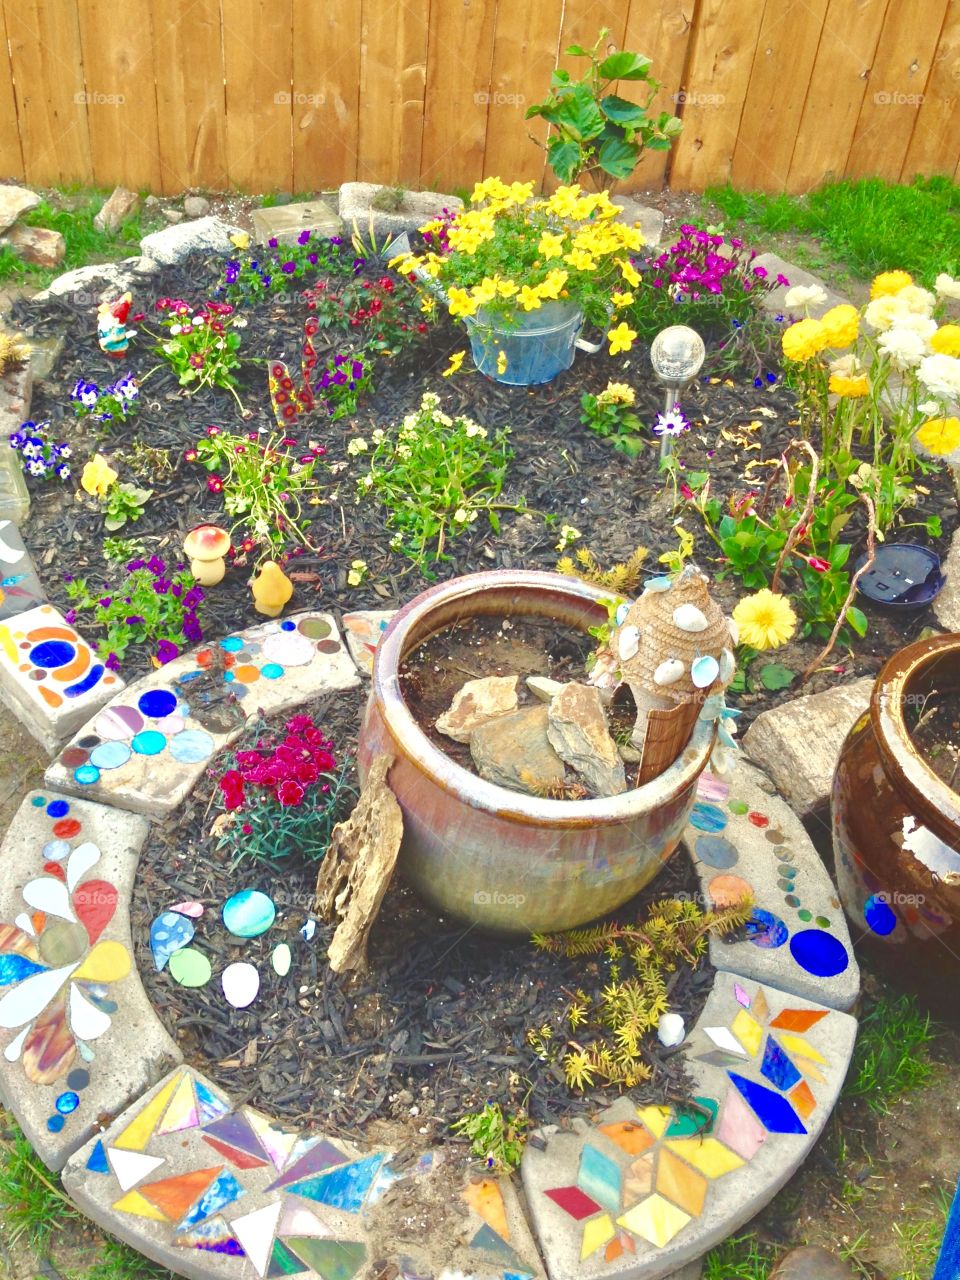 "Fairy Garden" with different plants and colorful flowers, surrounded by rocks, seashells, fairy figurines, colorful stones and peices of slate, all arranged creatively in designed circular enclosures, some transplanted from pots, some still in pots.